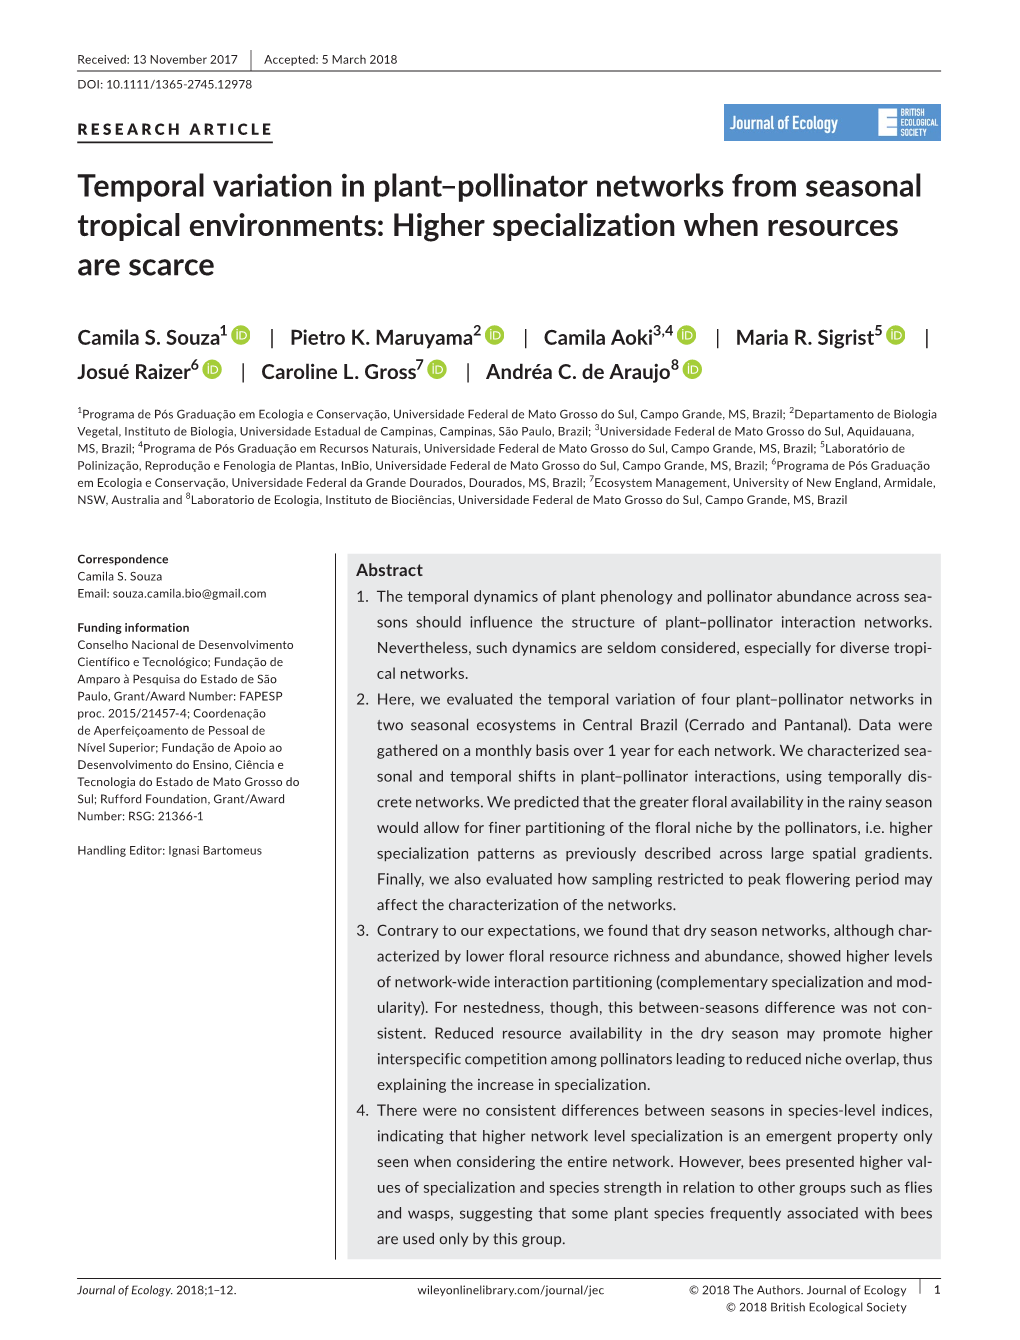 Temporal Variation in Plant–Pollinator Networks from Seasonal Tropical Environments: Higher Specialization When Resources Are Scarce